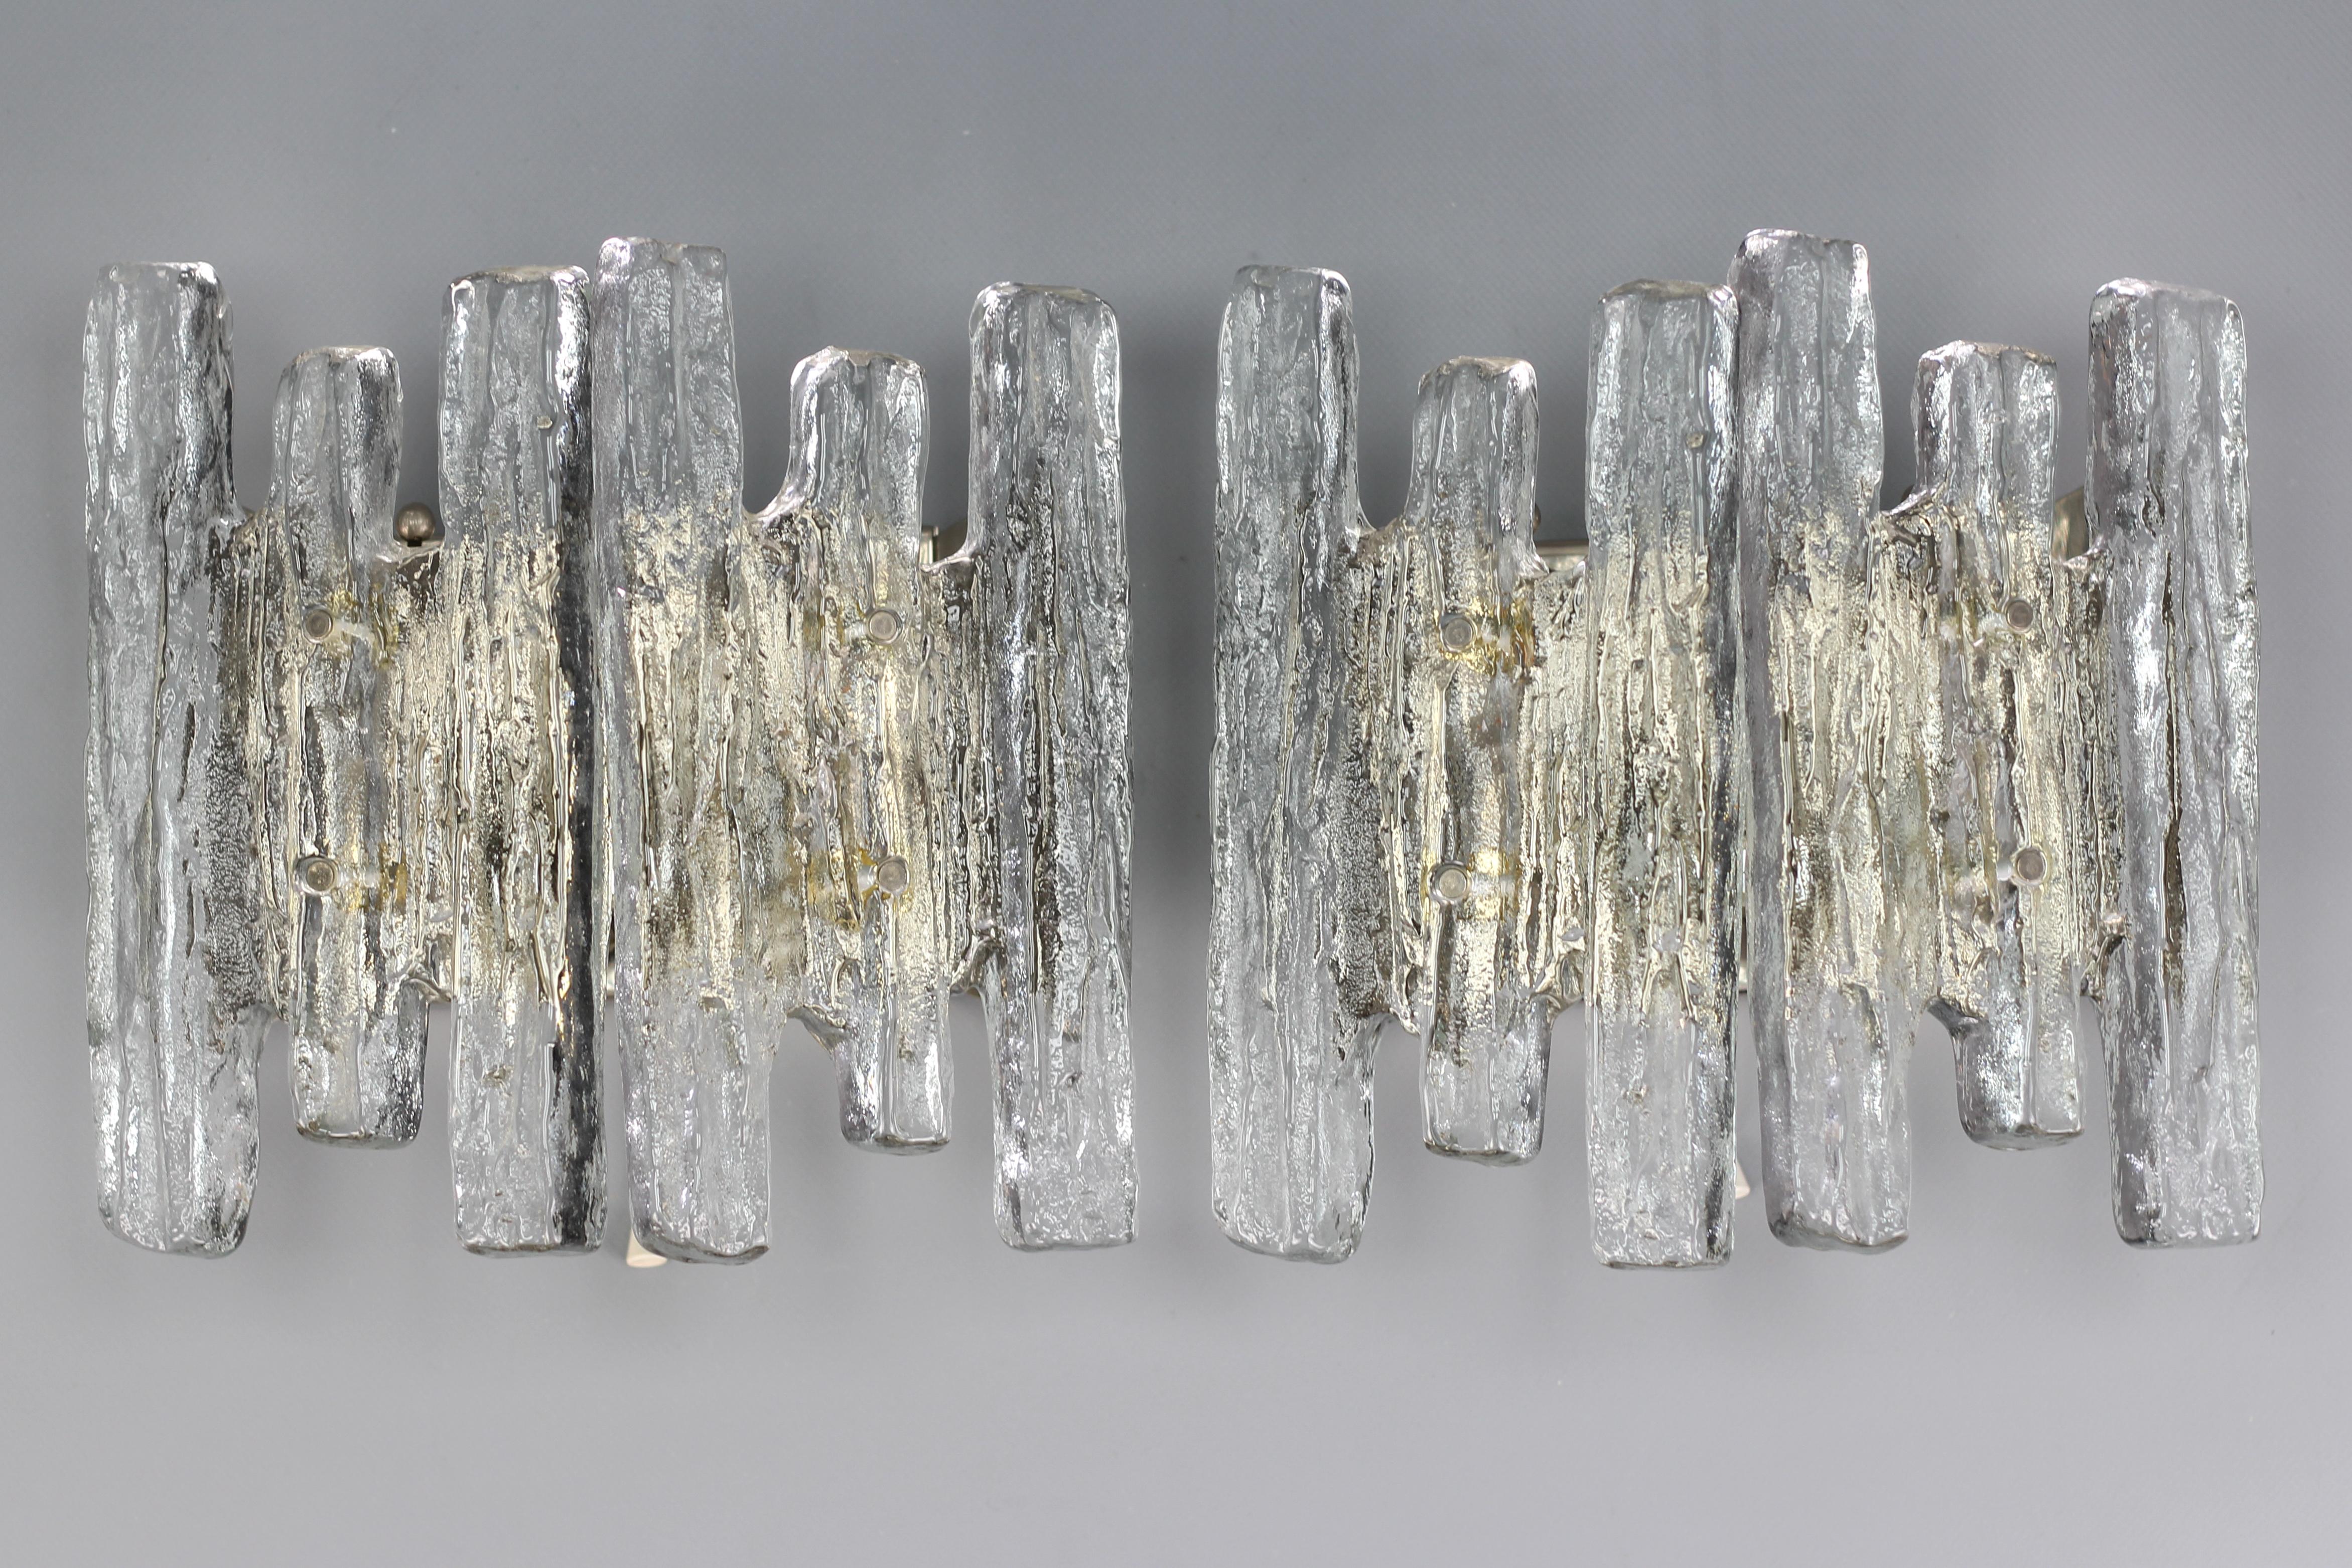 An impressive pair of Mid-Century Modern icicle ice glass wall sconces made by Kalmar, Franken KG, Austria, circa in the 1970s.
Beautiful and elegant design wall sconces, each having two heavy blocks of ice glass, nickel-plated steel backplate with